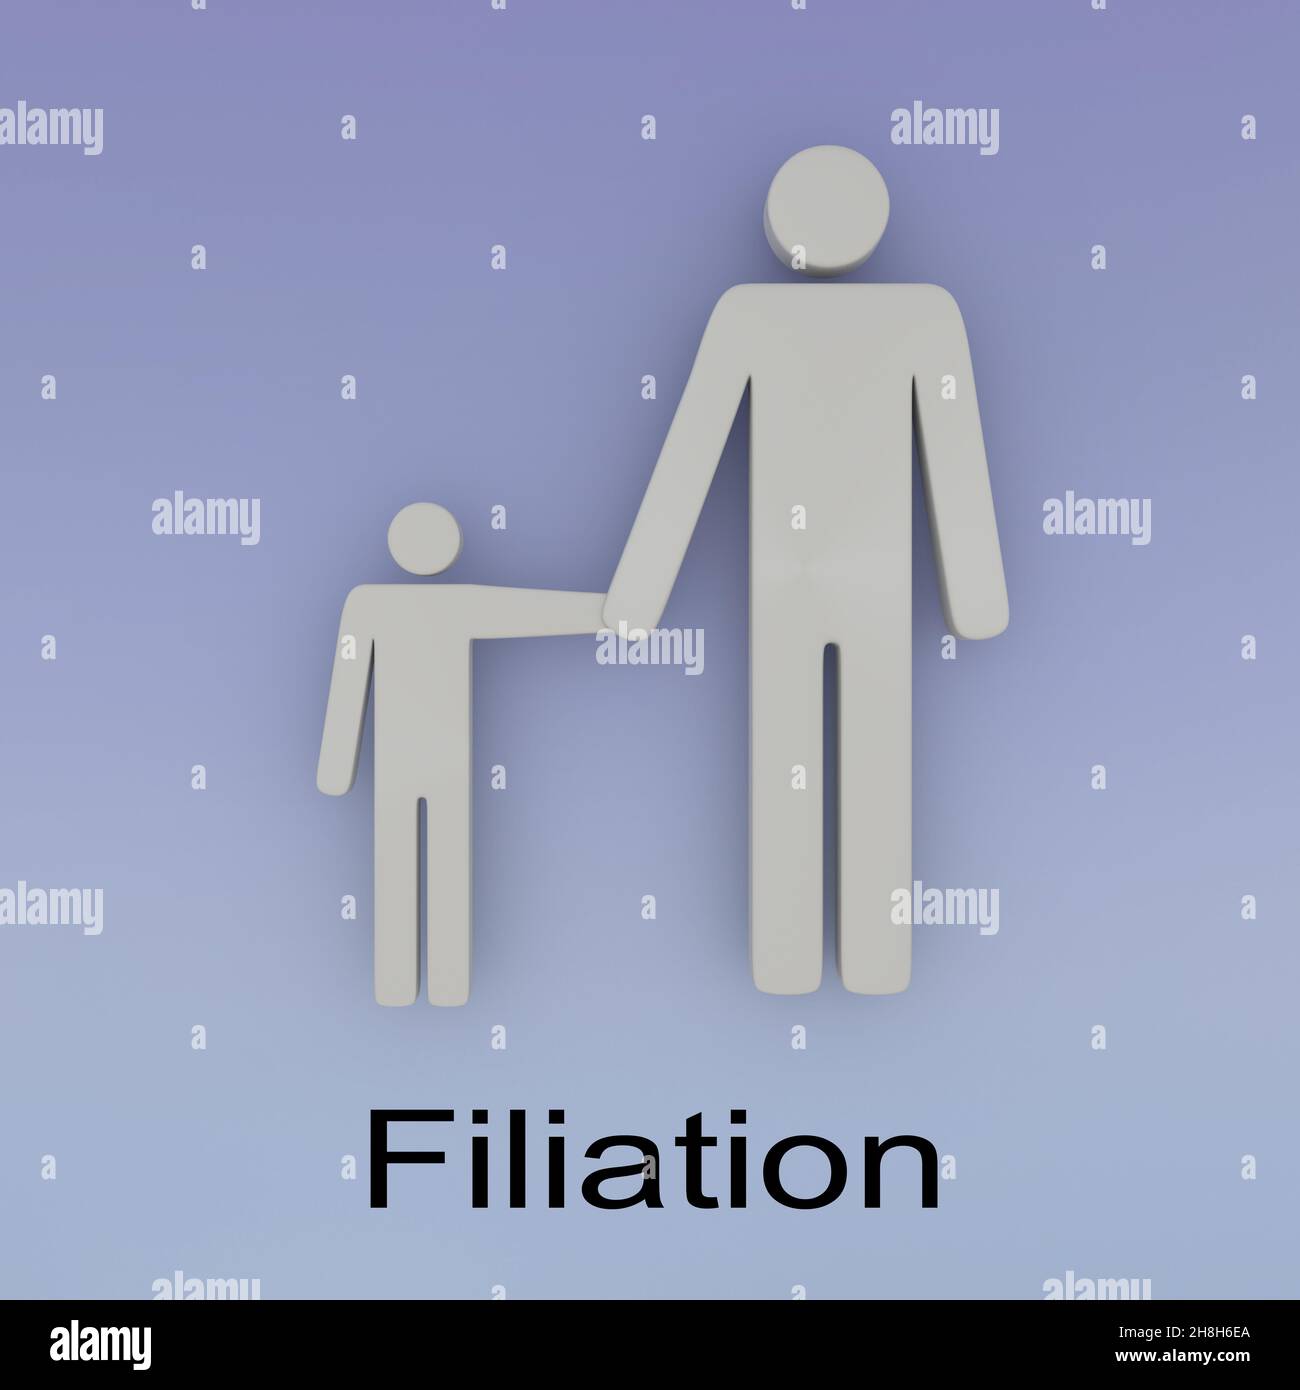 3D illustration of father and son with Filiation script, isolated on blue background. Stock Photo